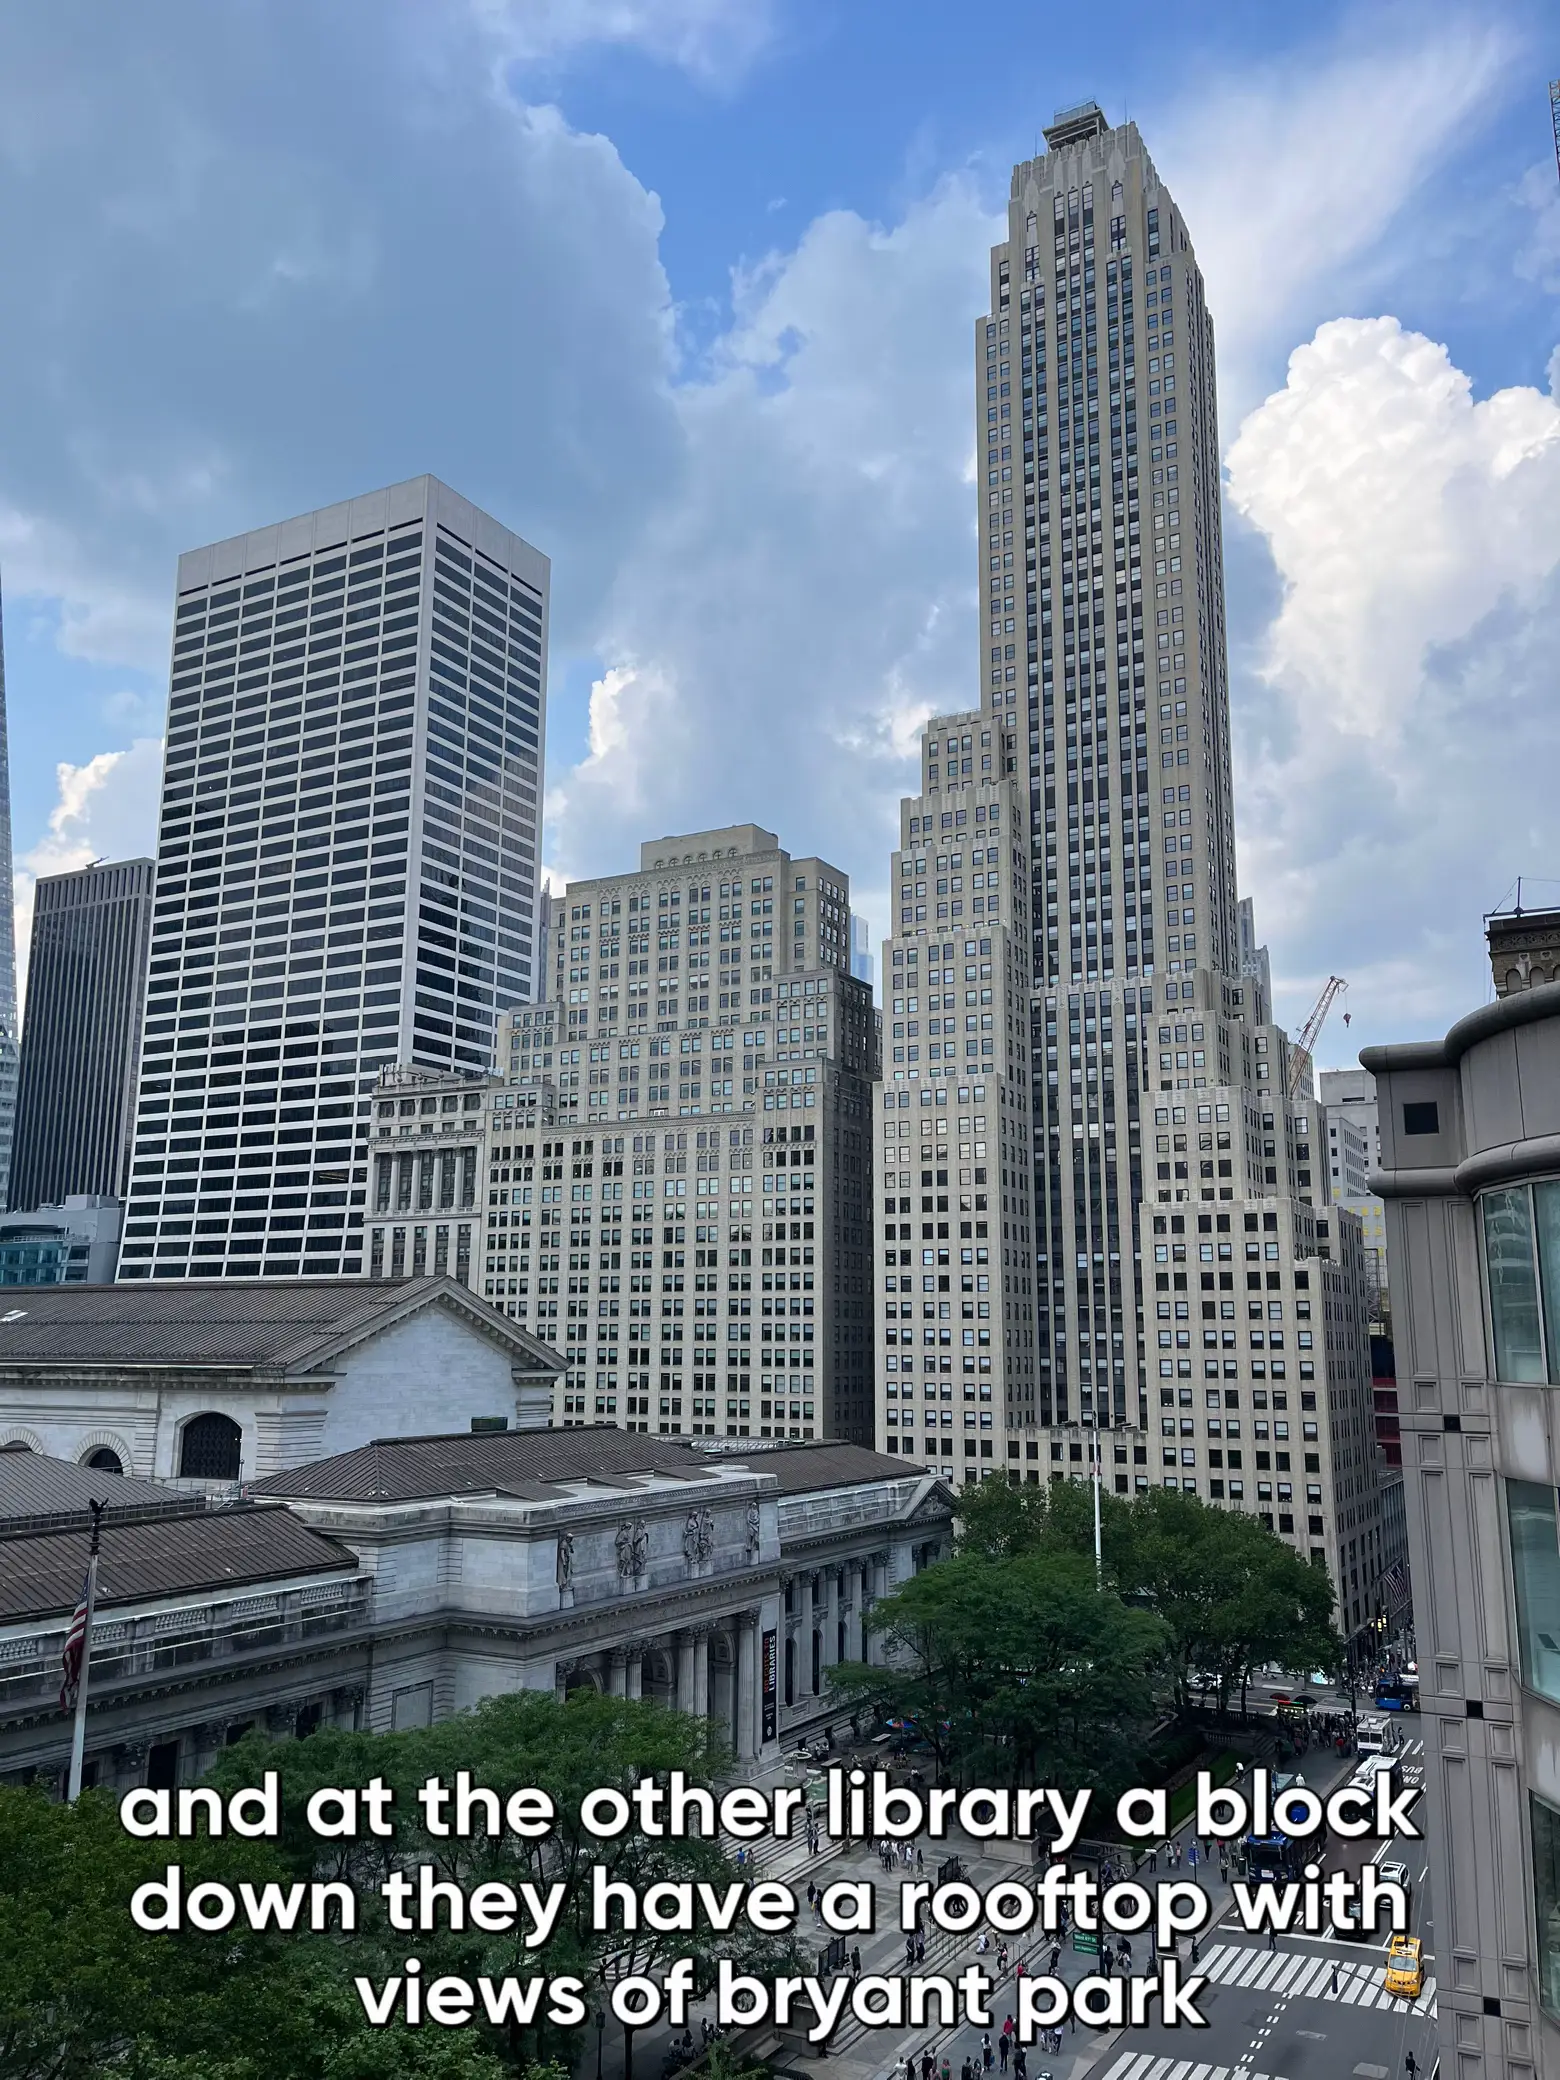  The image shows a city skyline with a large building in the foreground. The building has a sign on top that says "and at the other library